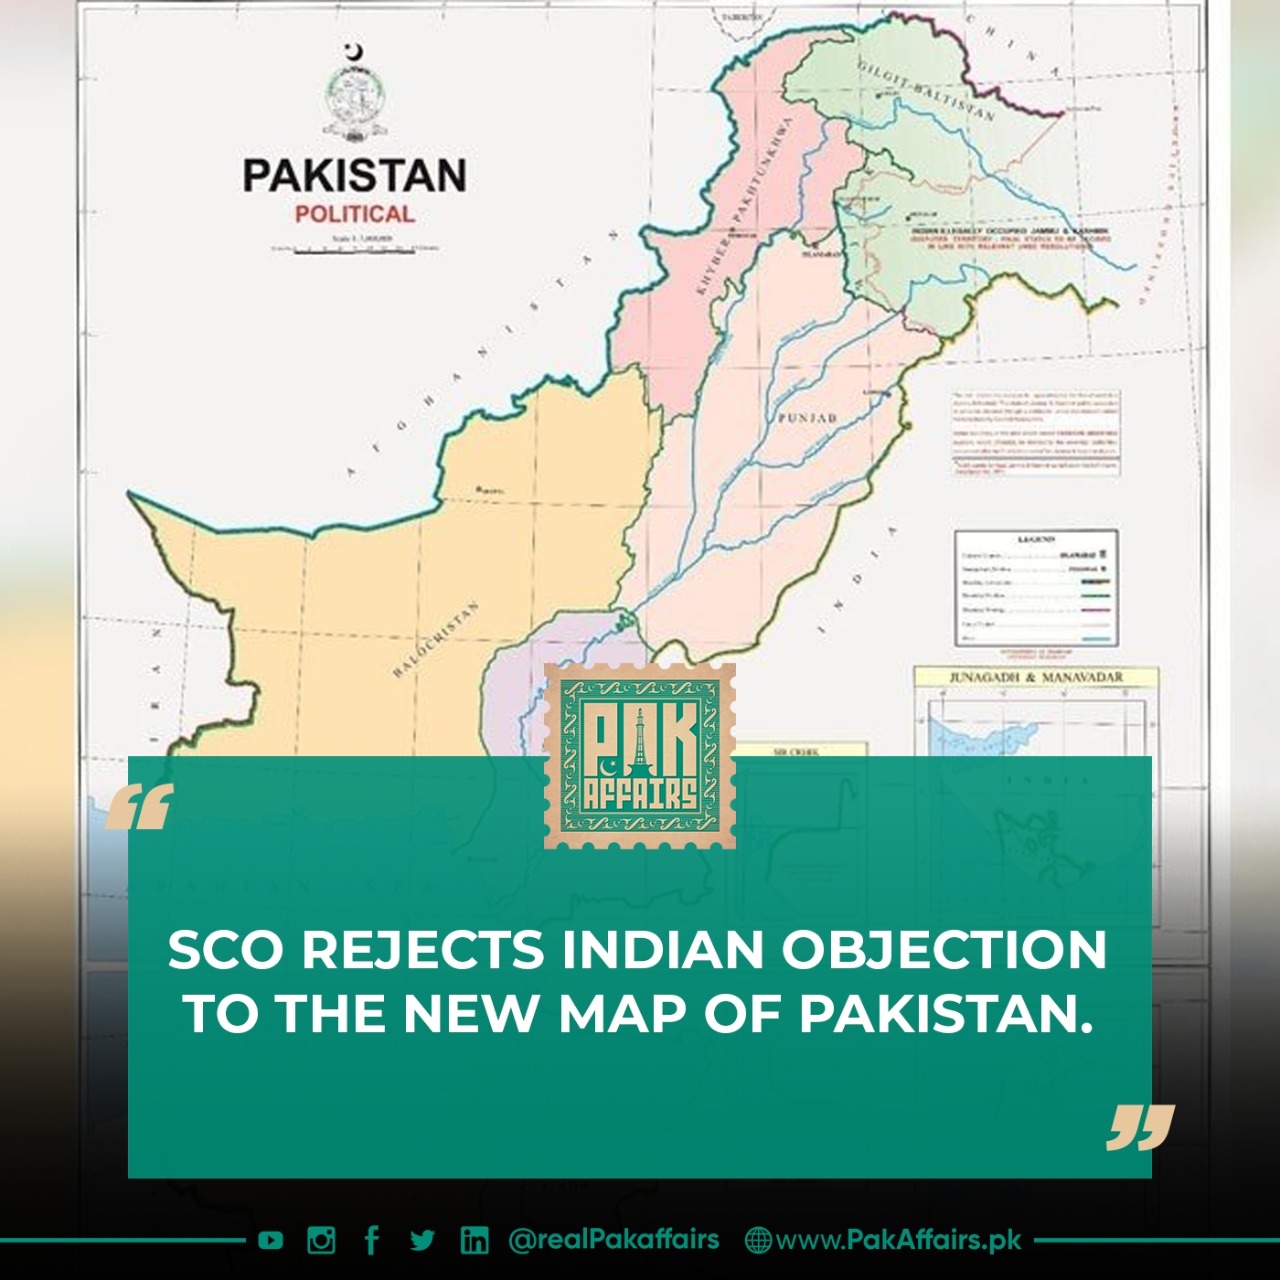 SCO rejects Indian objection to the new map of Pakistan